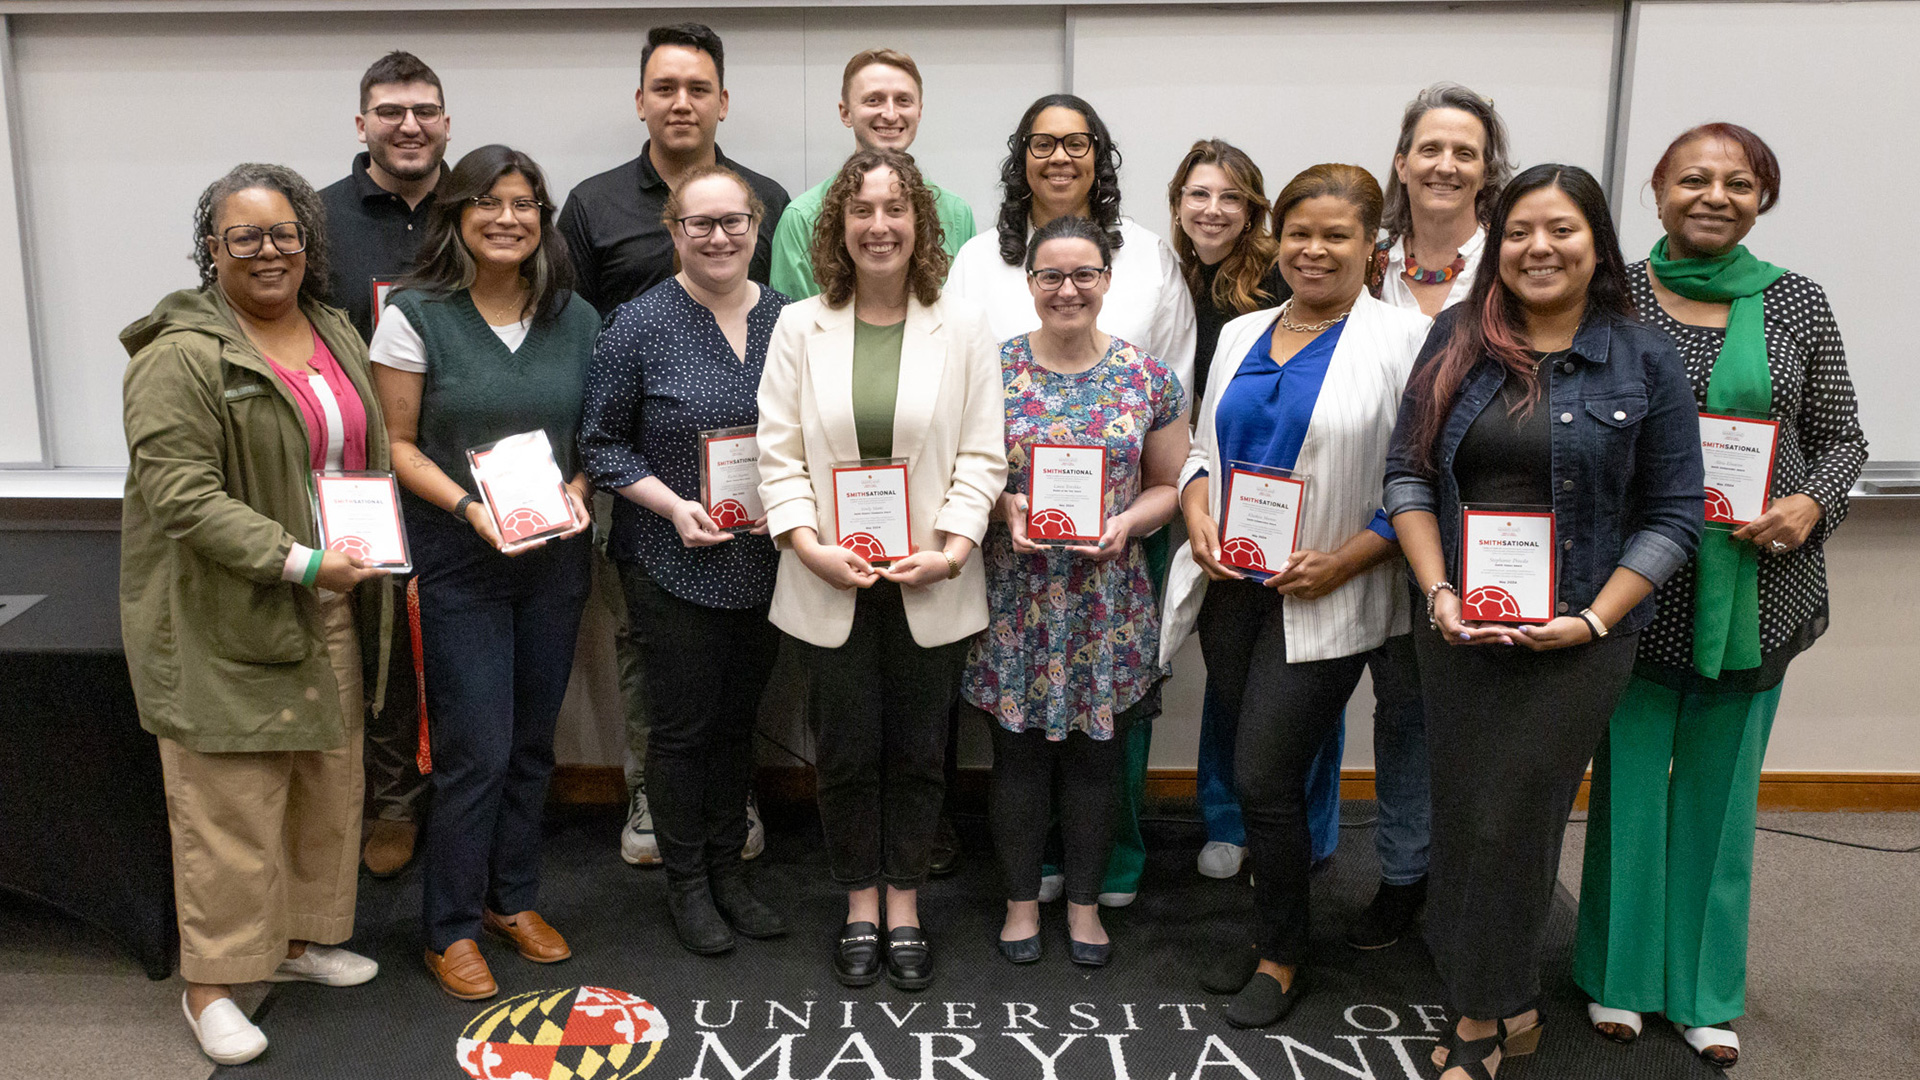 Celebrating Dedication: A group of Smith School staff award winners proudly showcase their well-deserved honors. Your hard work and commitment make our community thrive.